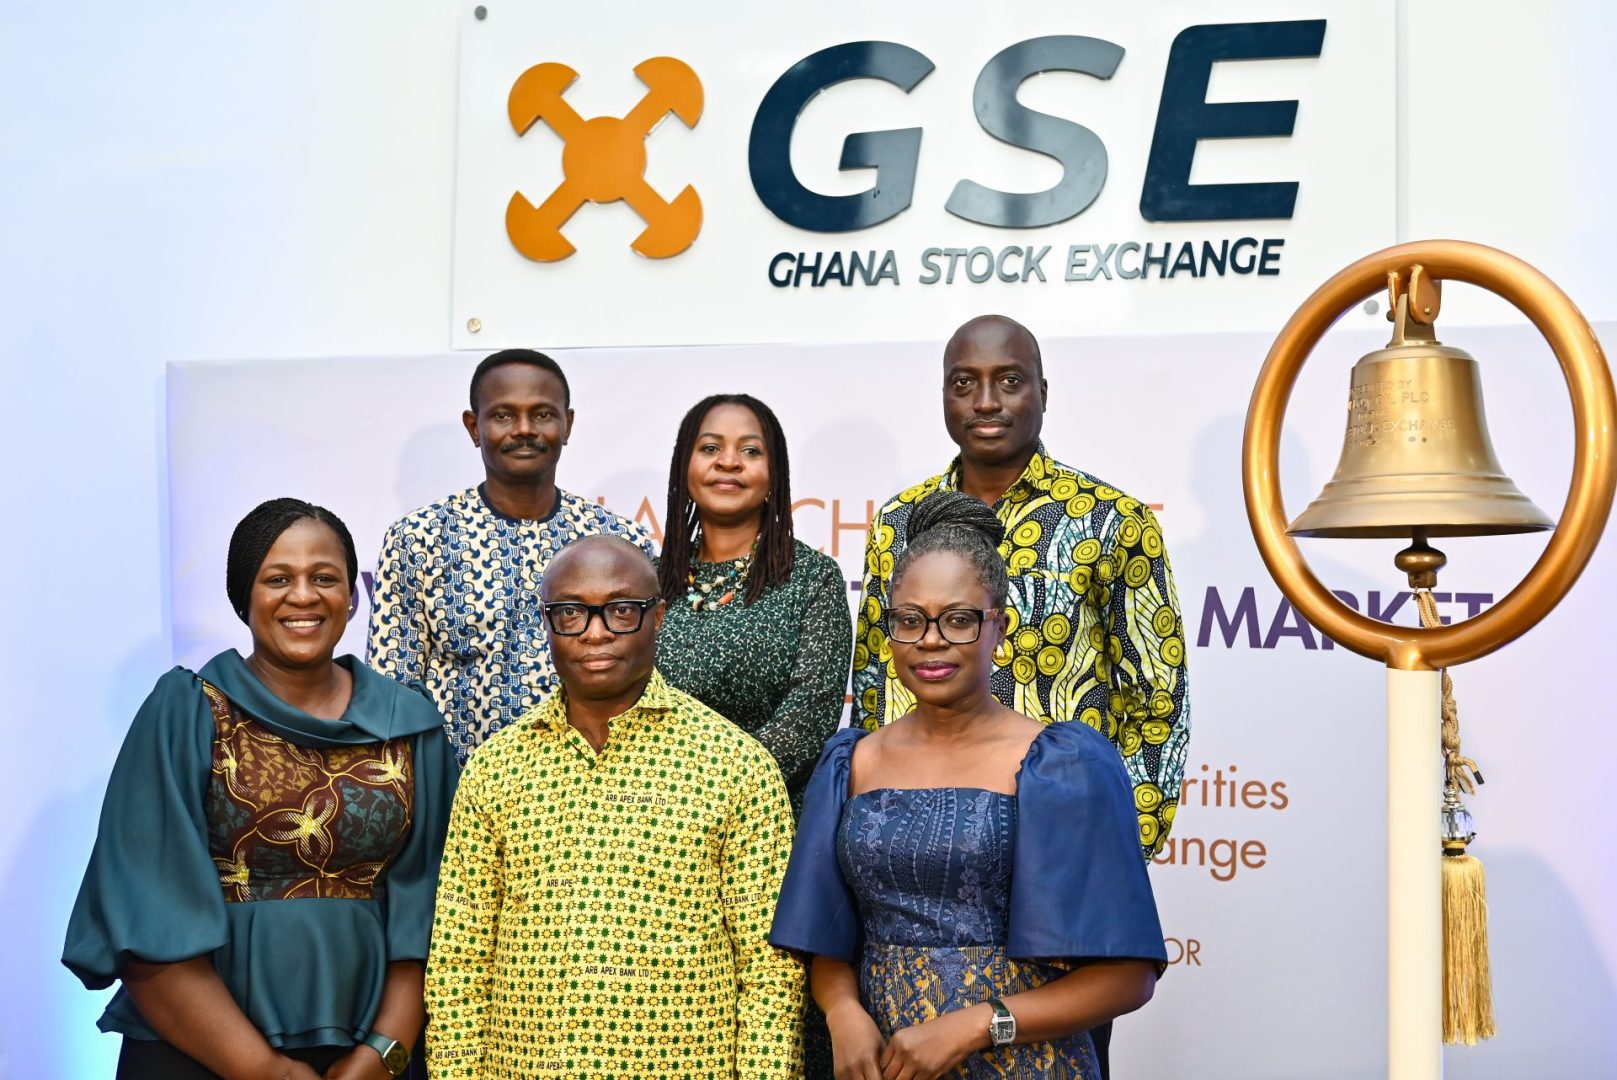 GSE Launches the First Regulated Over-the-Counter (OTC) Market in Ghana, Ghana Stock Exchange